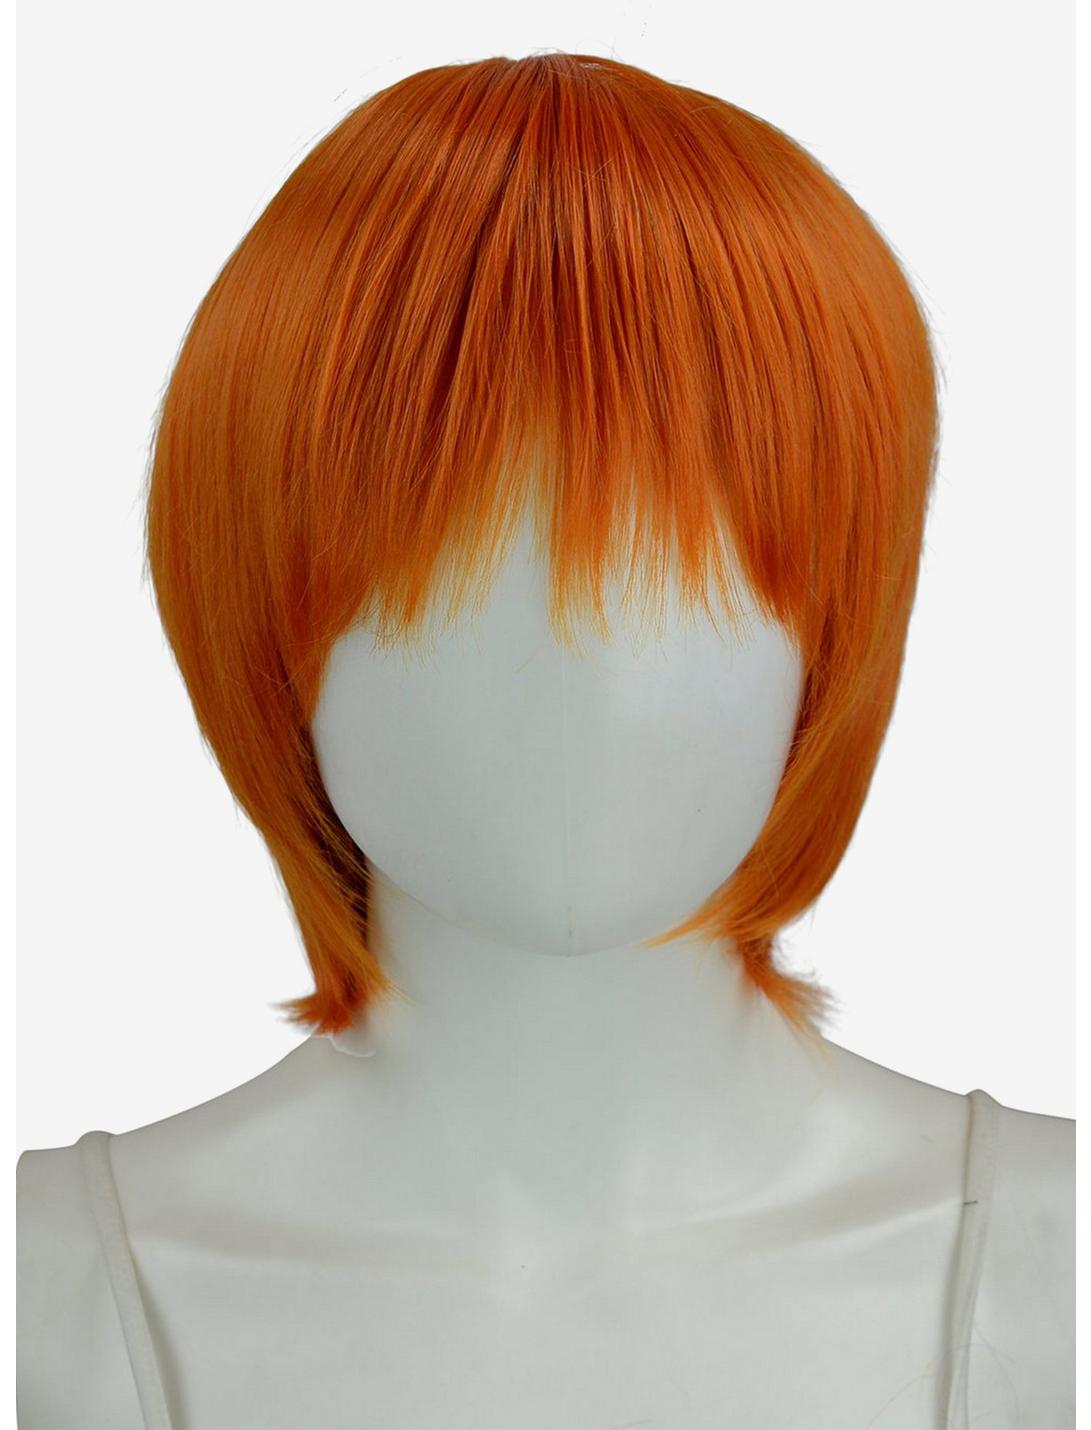 Epic Cosplay Aether Autumn Orange Layered Short Wig, , hi-res